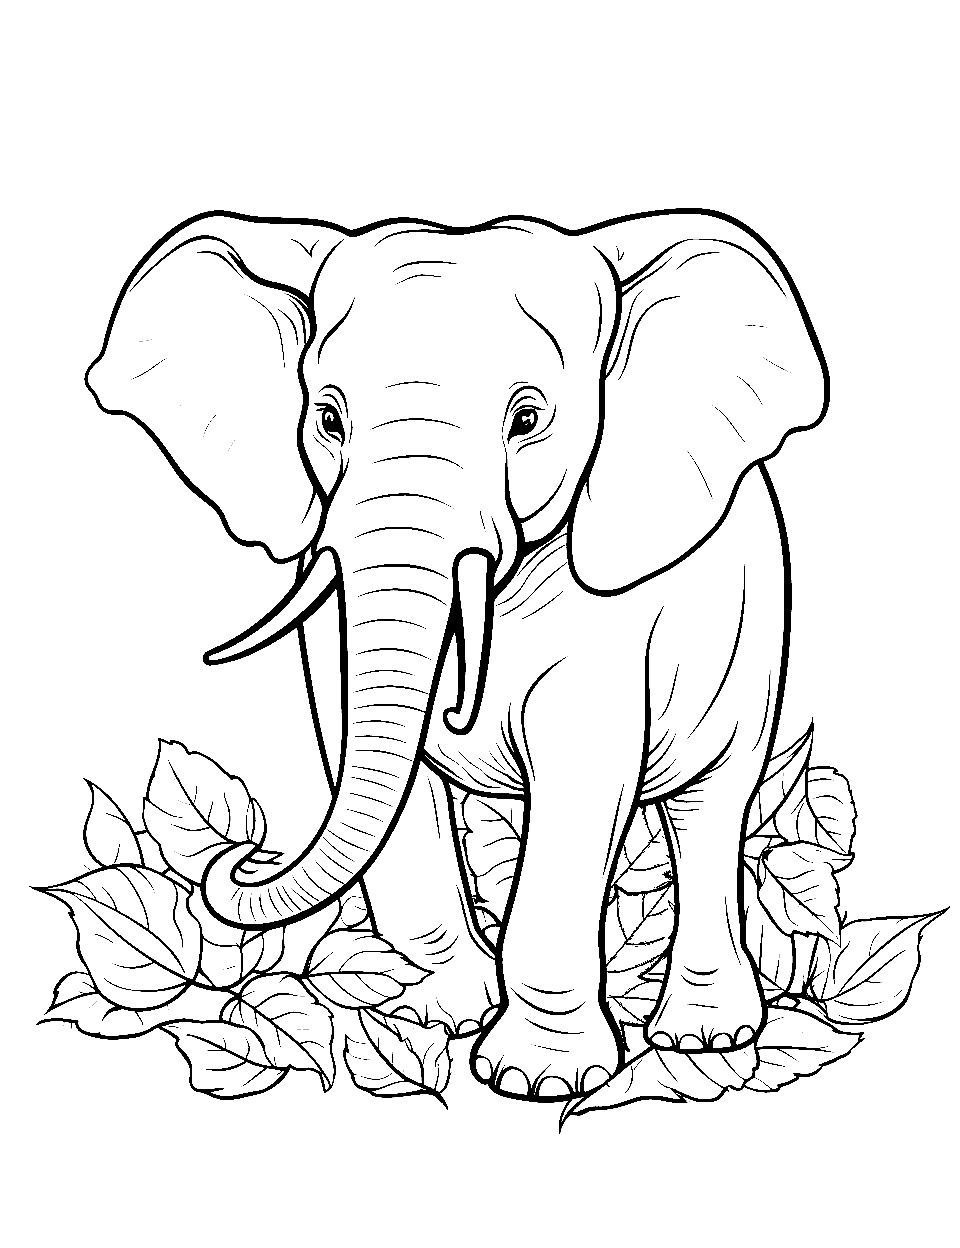 Autumn Leaves and Elephant Coloring Page - An elephant amidst fallen autumn leaves.